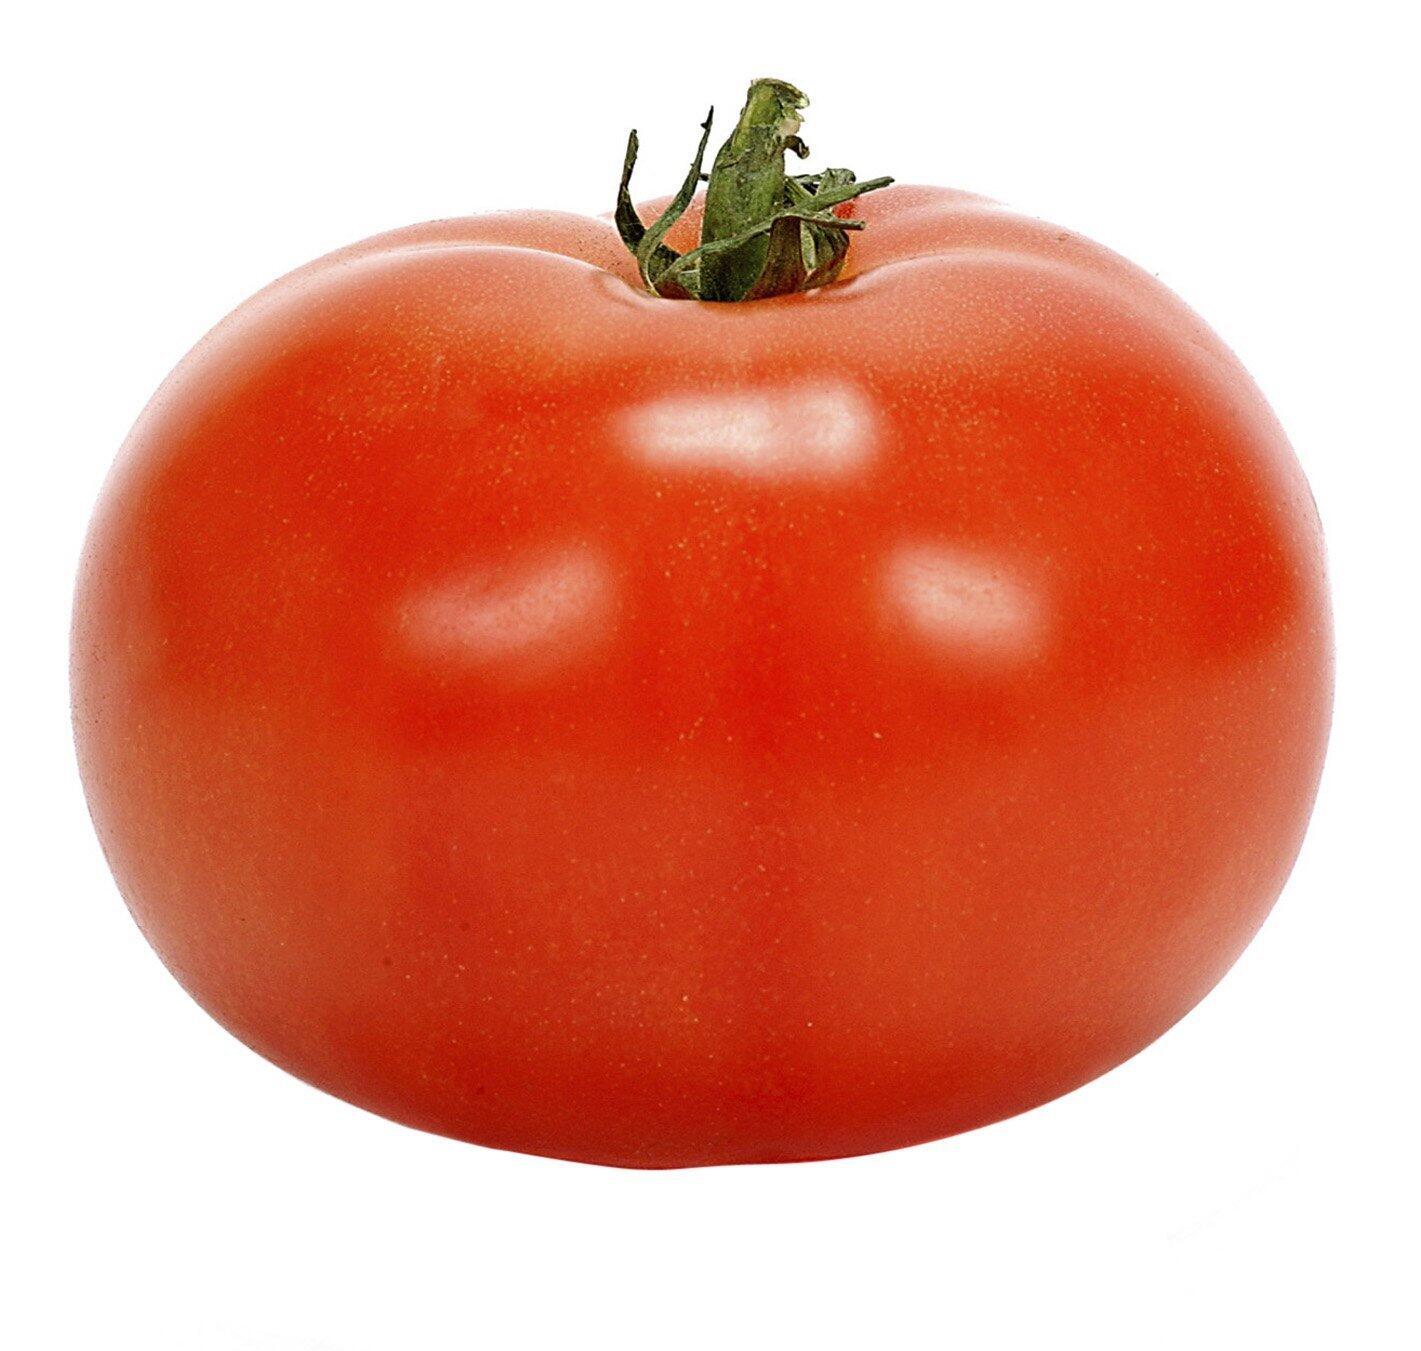 Caspian Pink Tomato, Heirloom Tomato Seeds: Totally Tomatoes